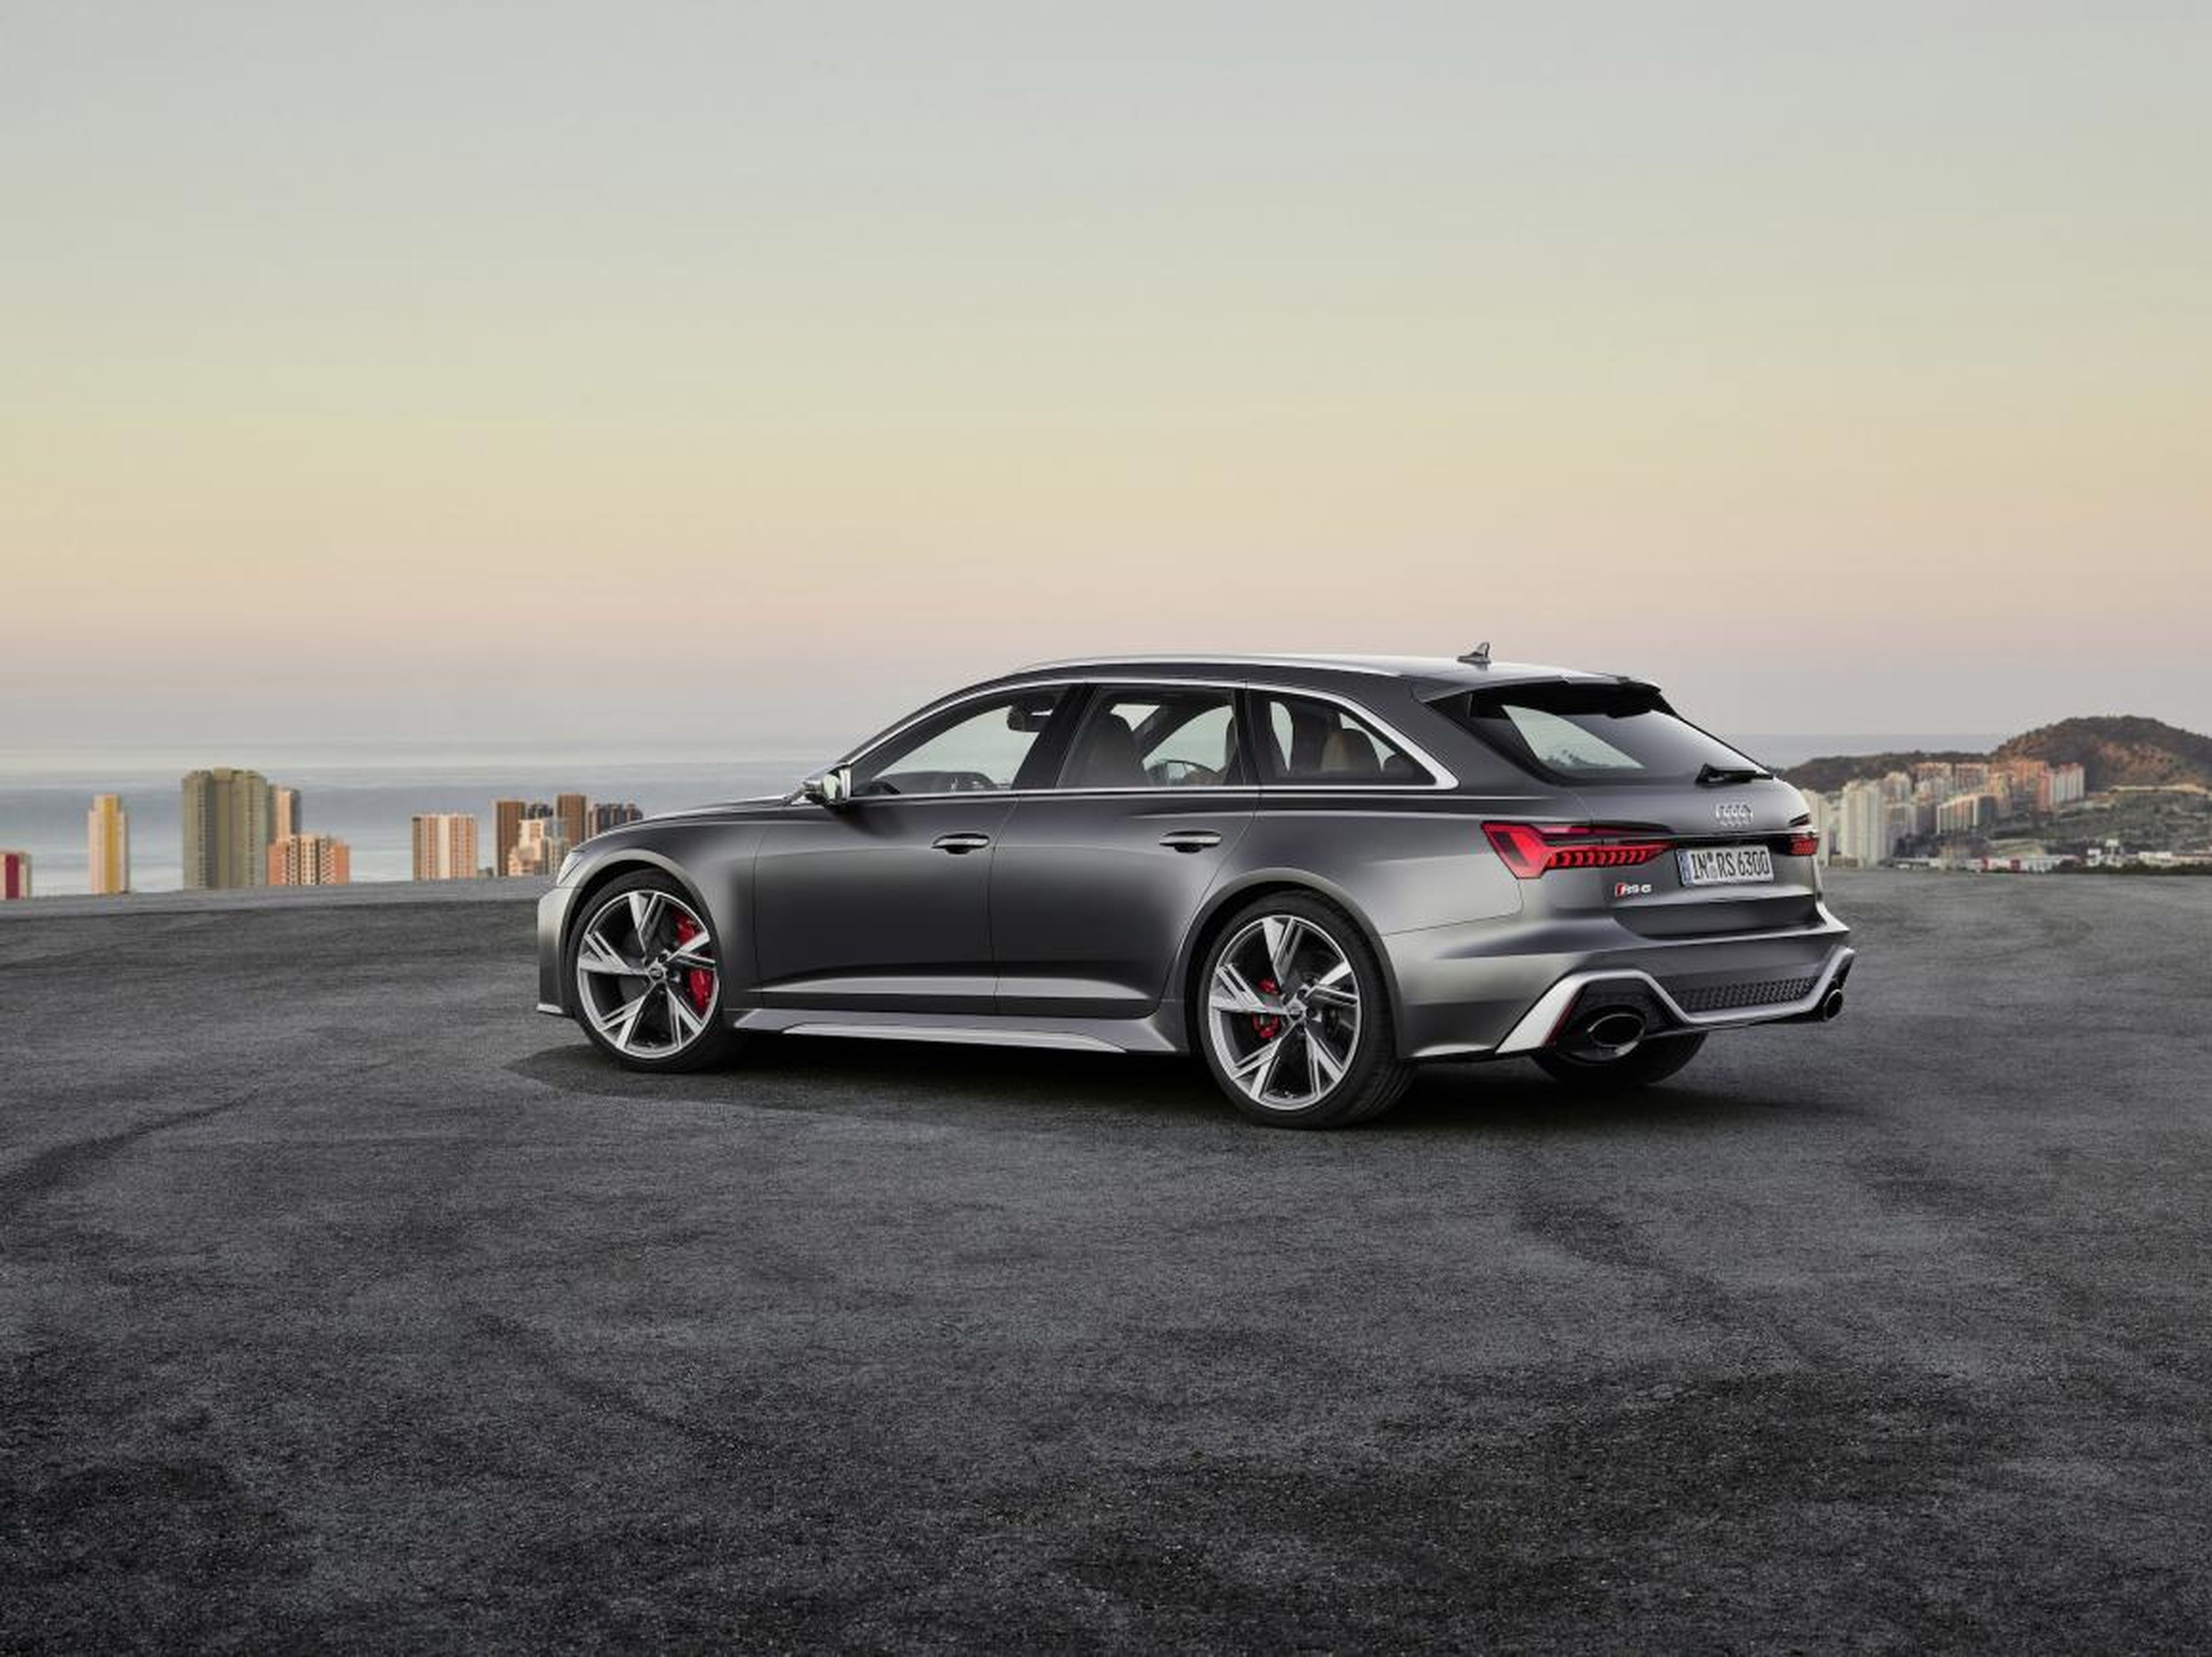 Audi showed its RS 6 Avant in Frankfurt. The high-performance wagon will have a hybrid V8 under the hood.